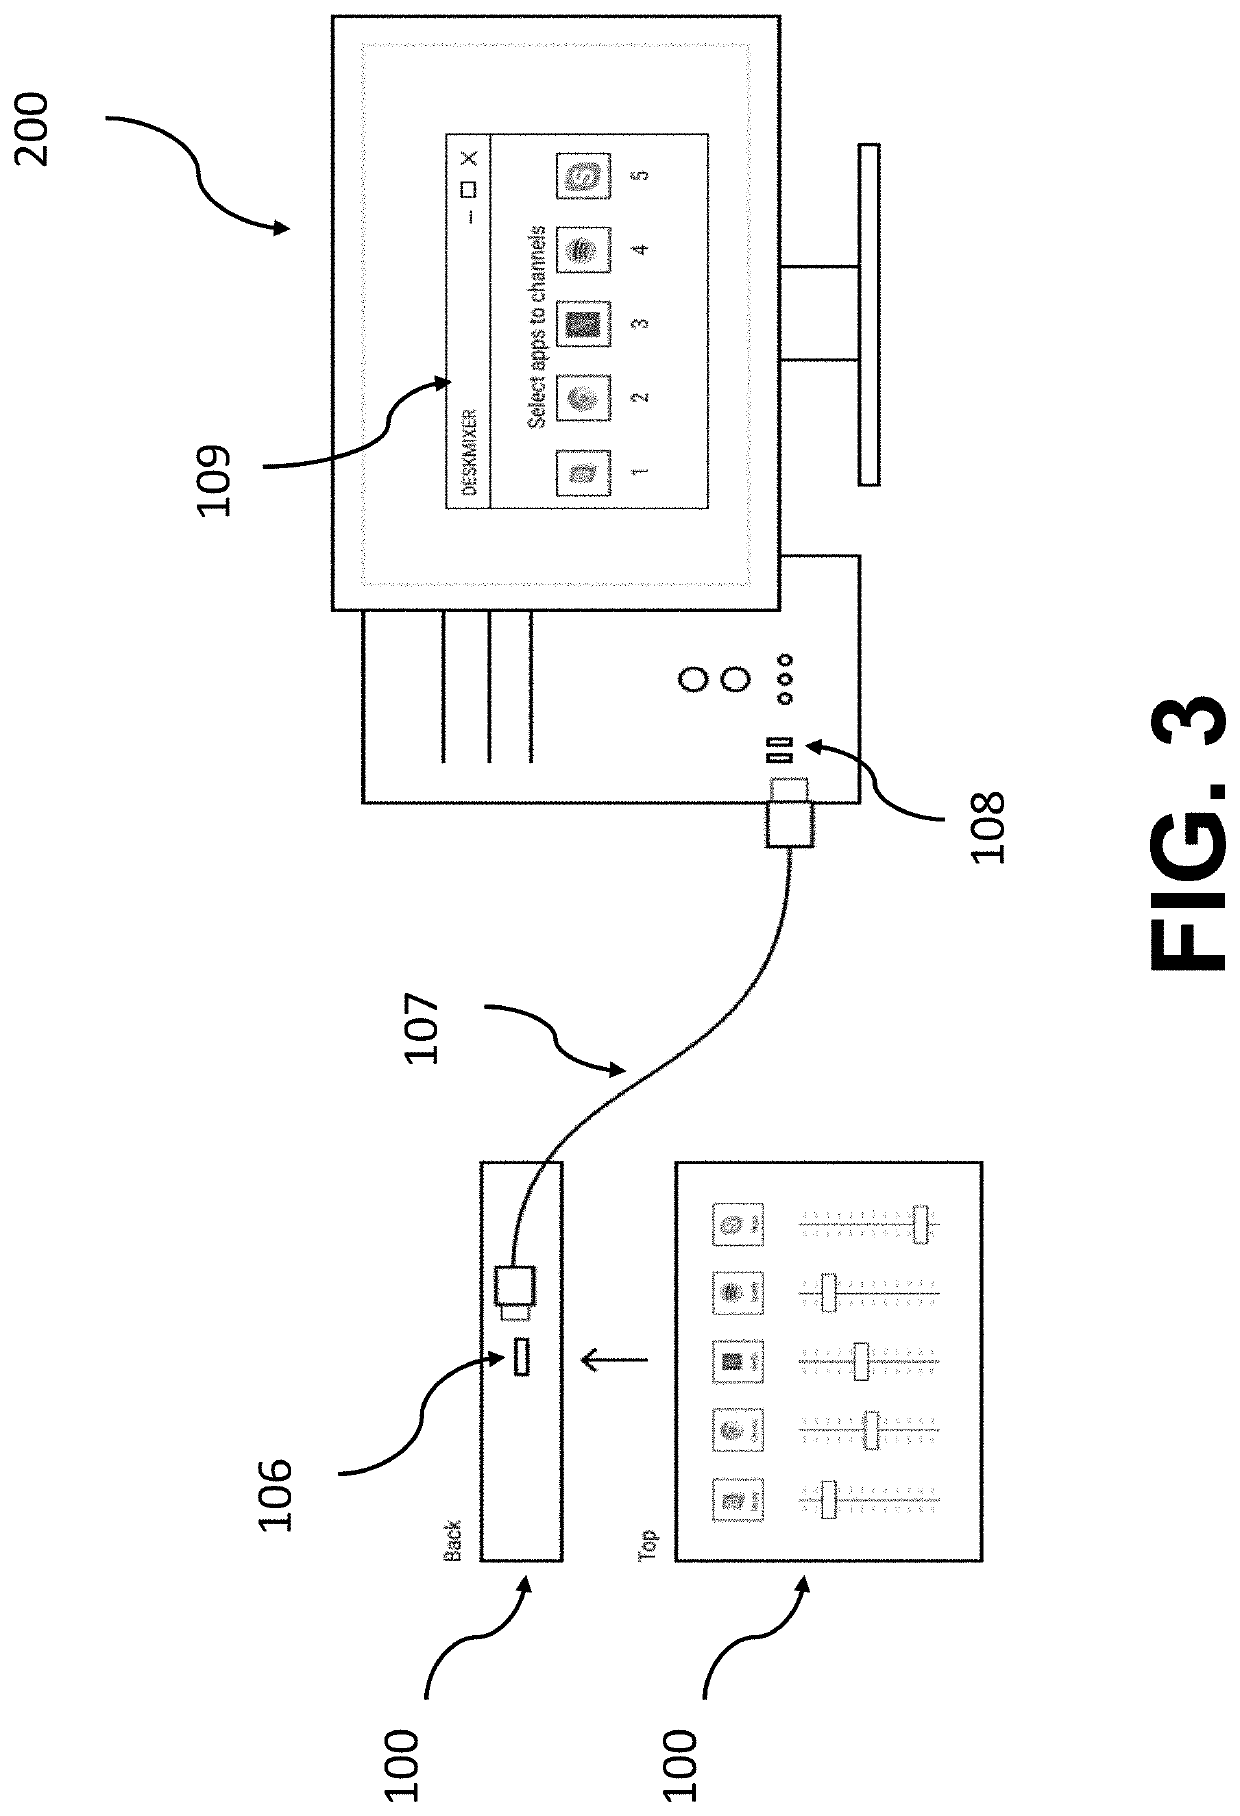 Apparatus to Visualize System Applications Volume Control